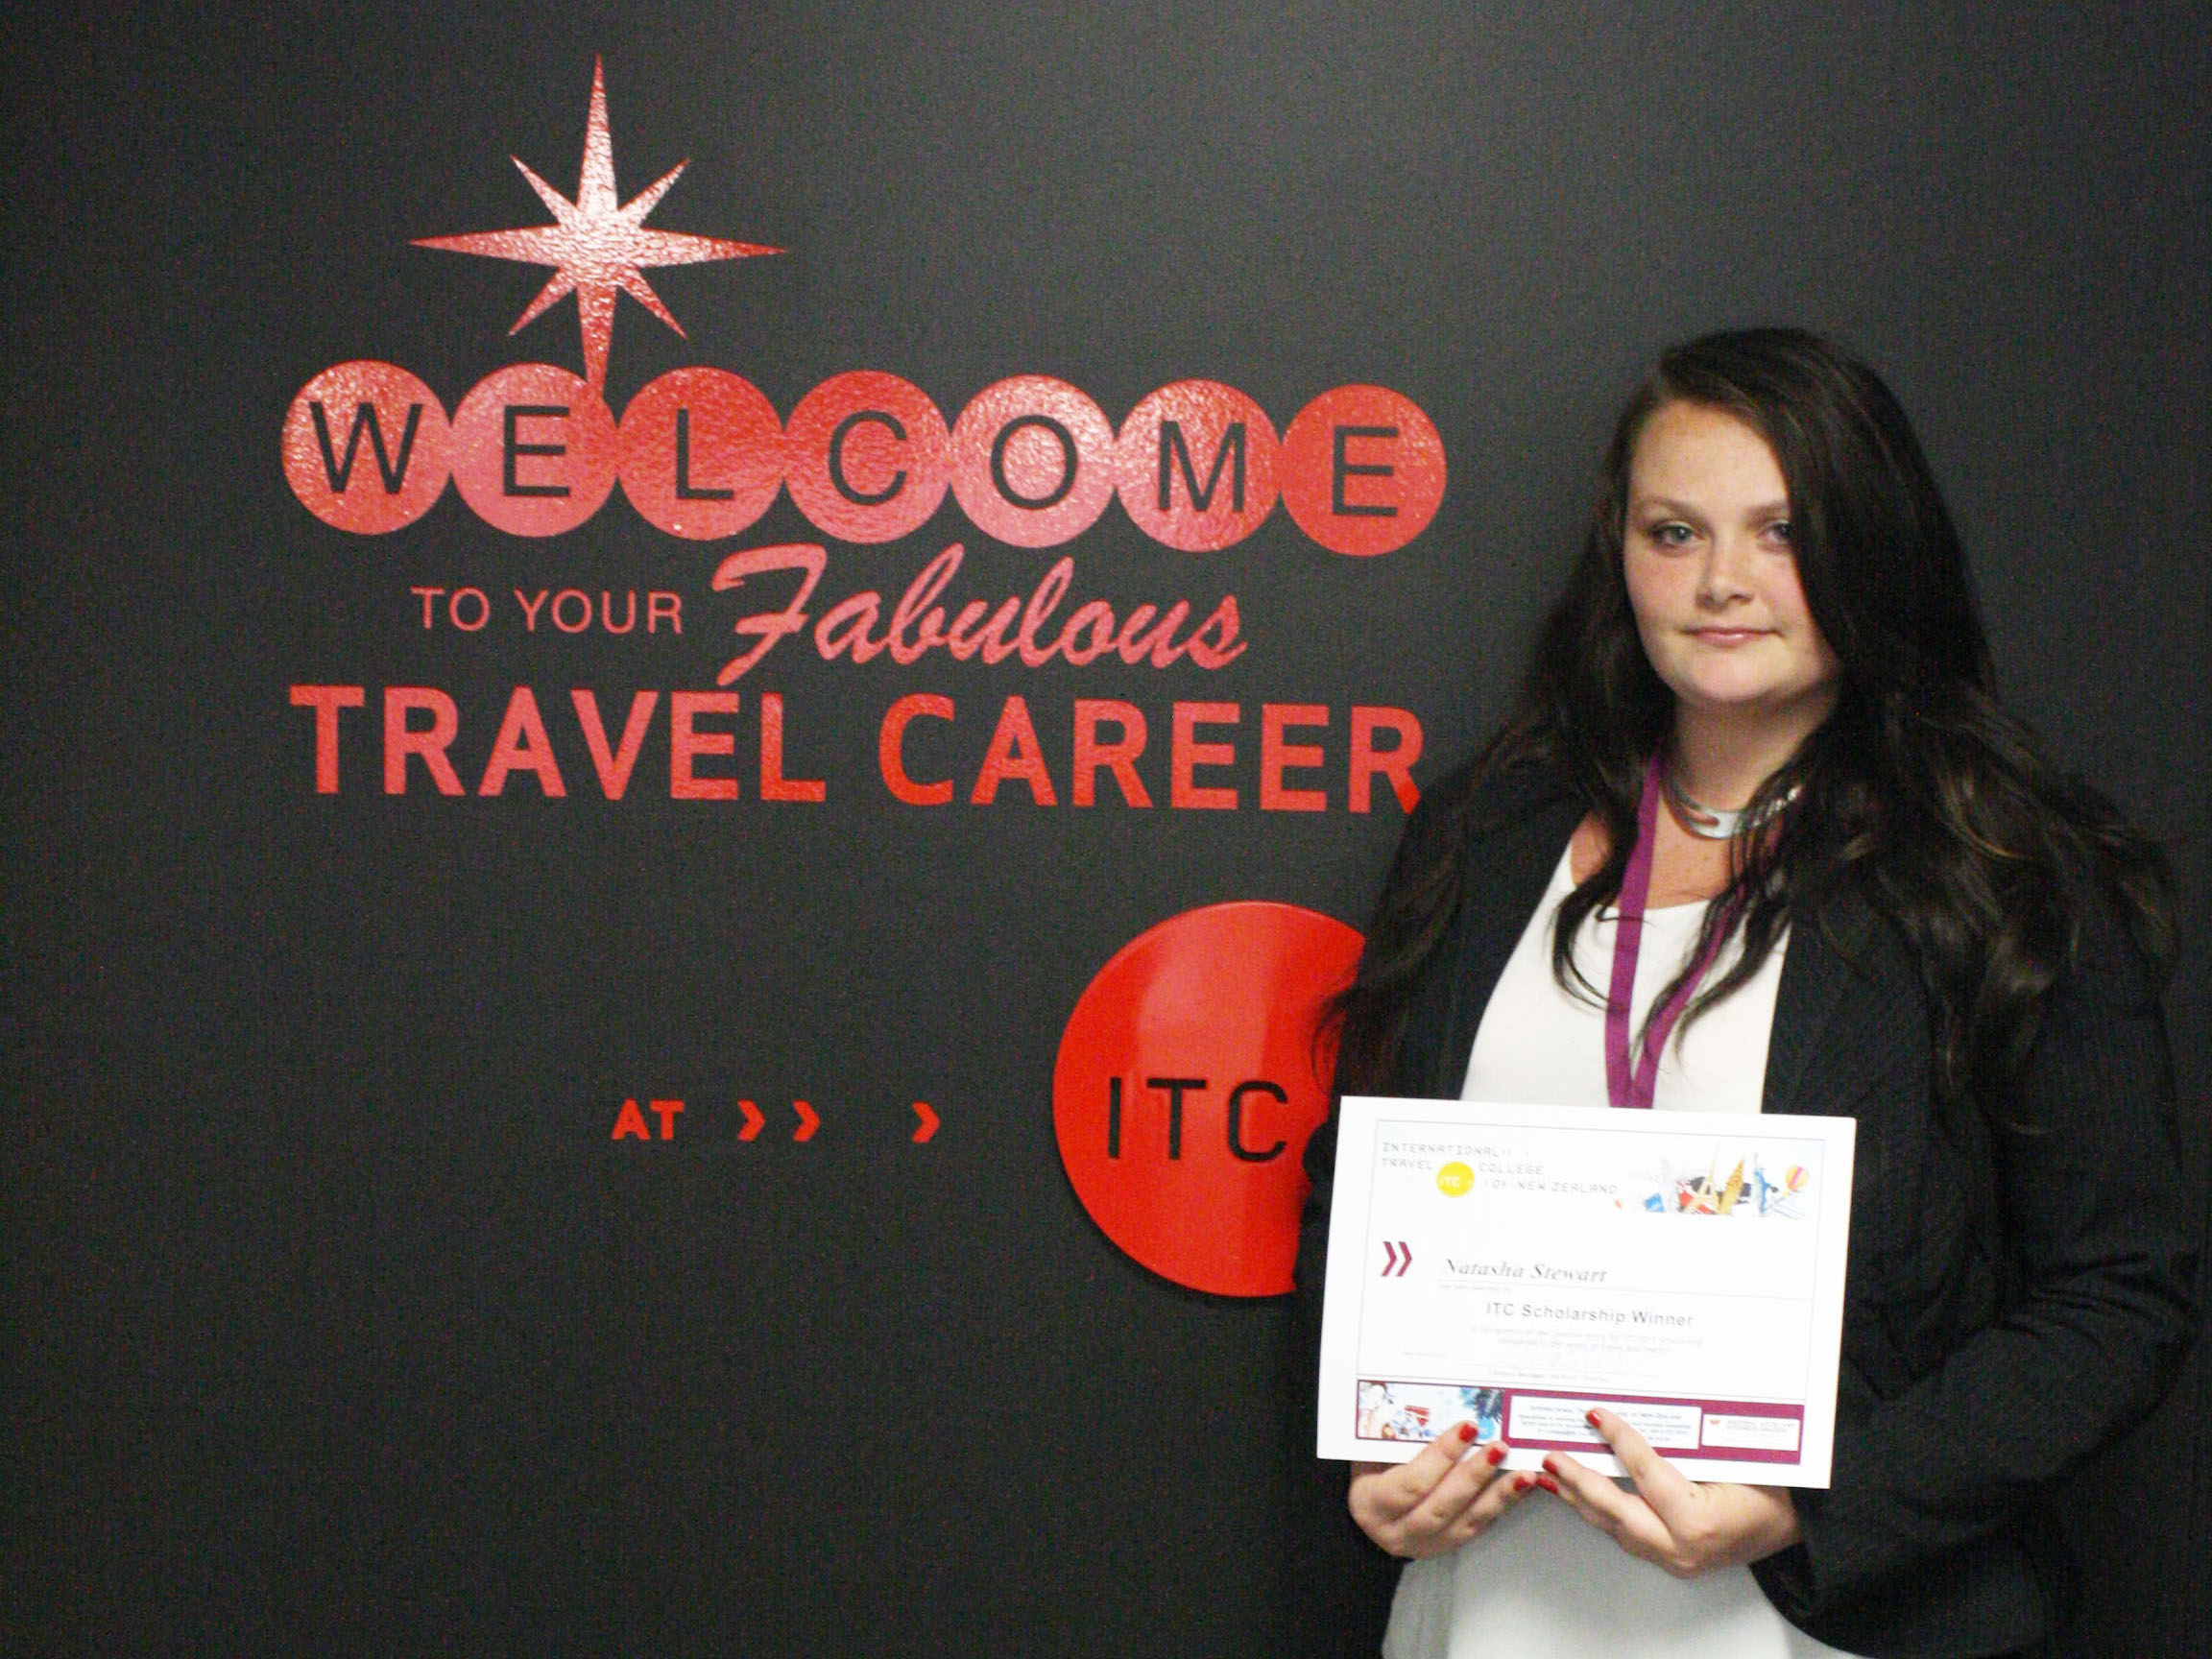 Natasha Stewart has a family connection at ITC - her mum is also studying here!